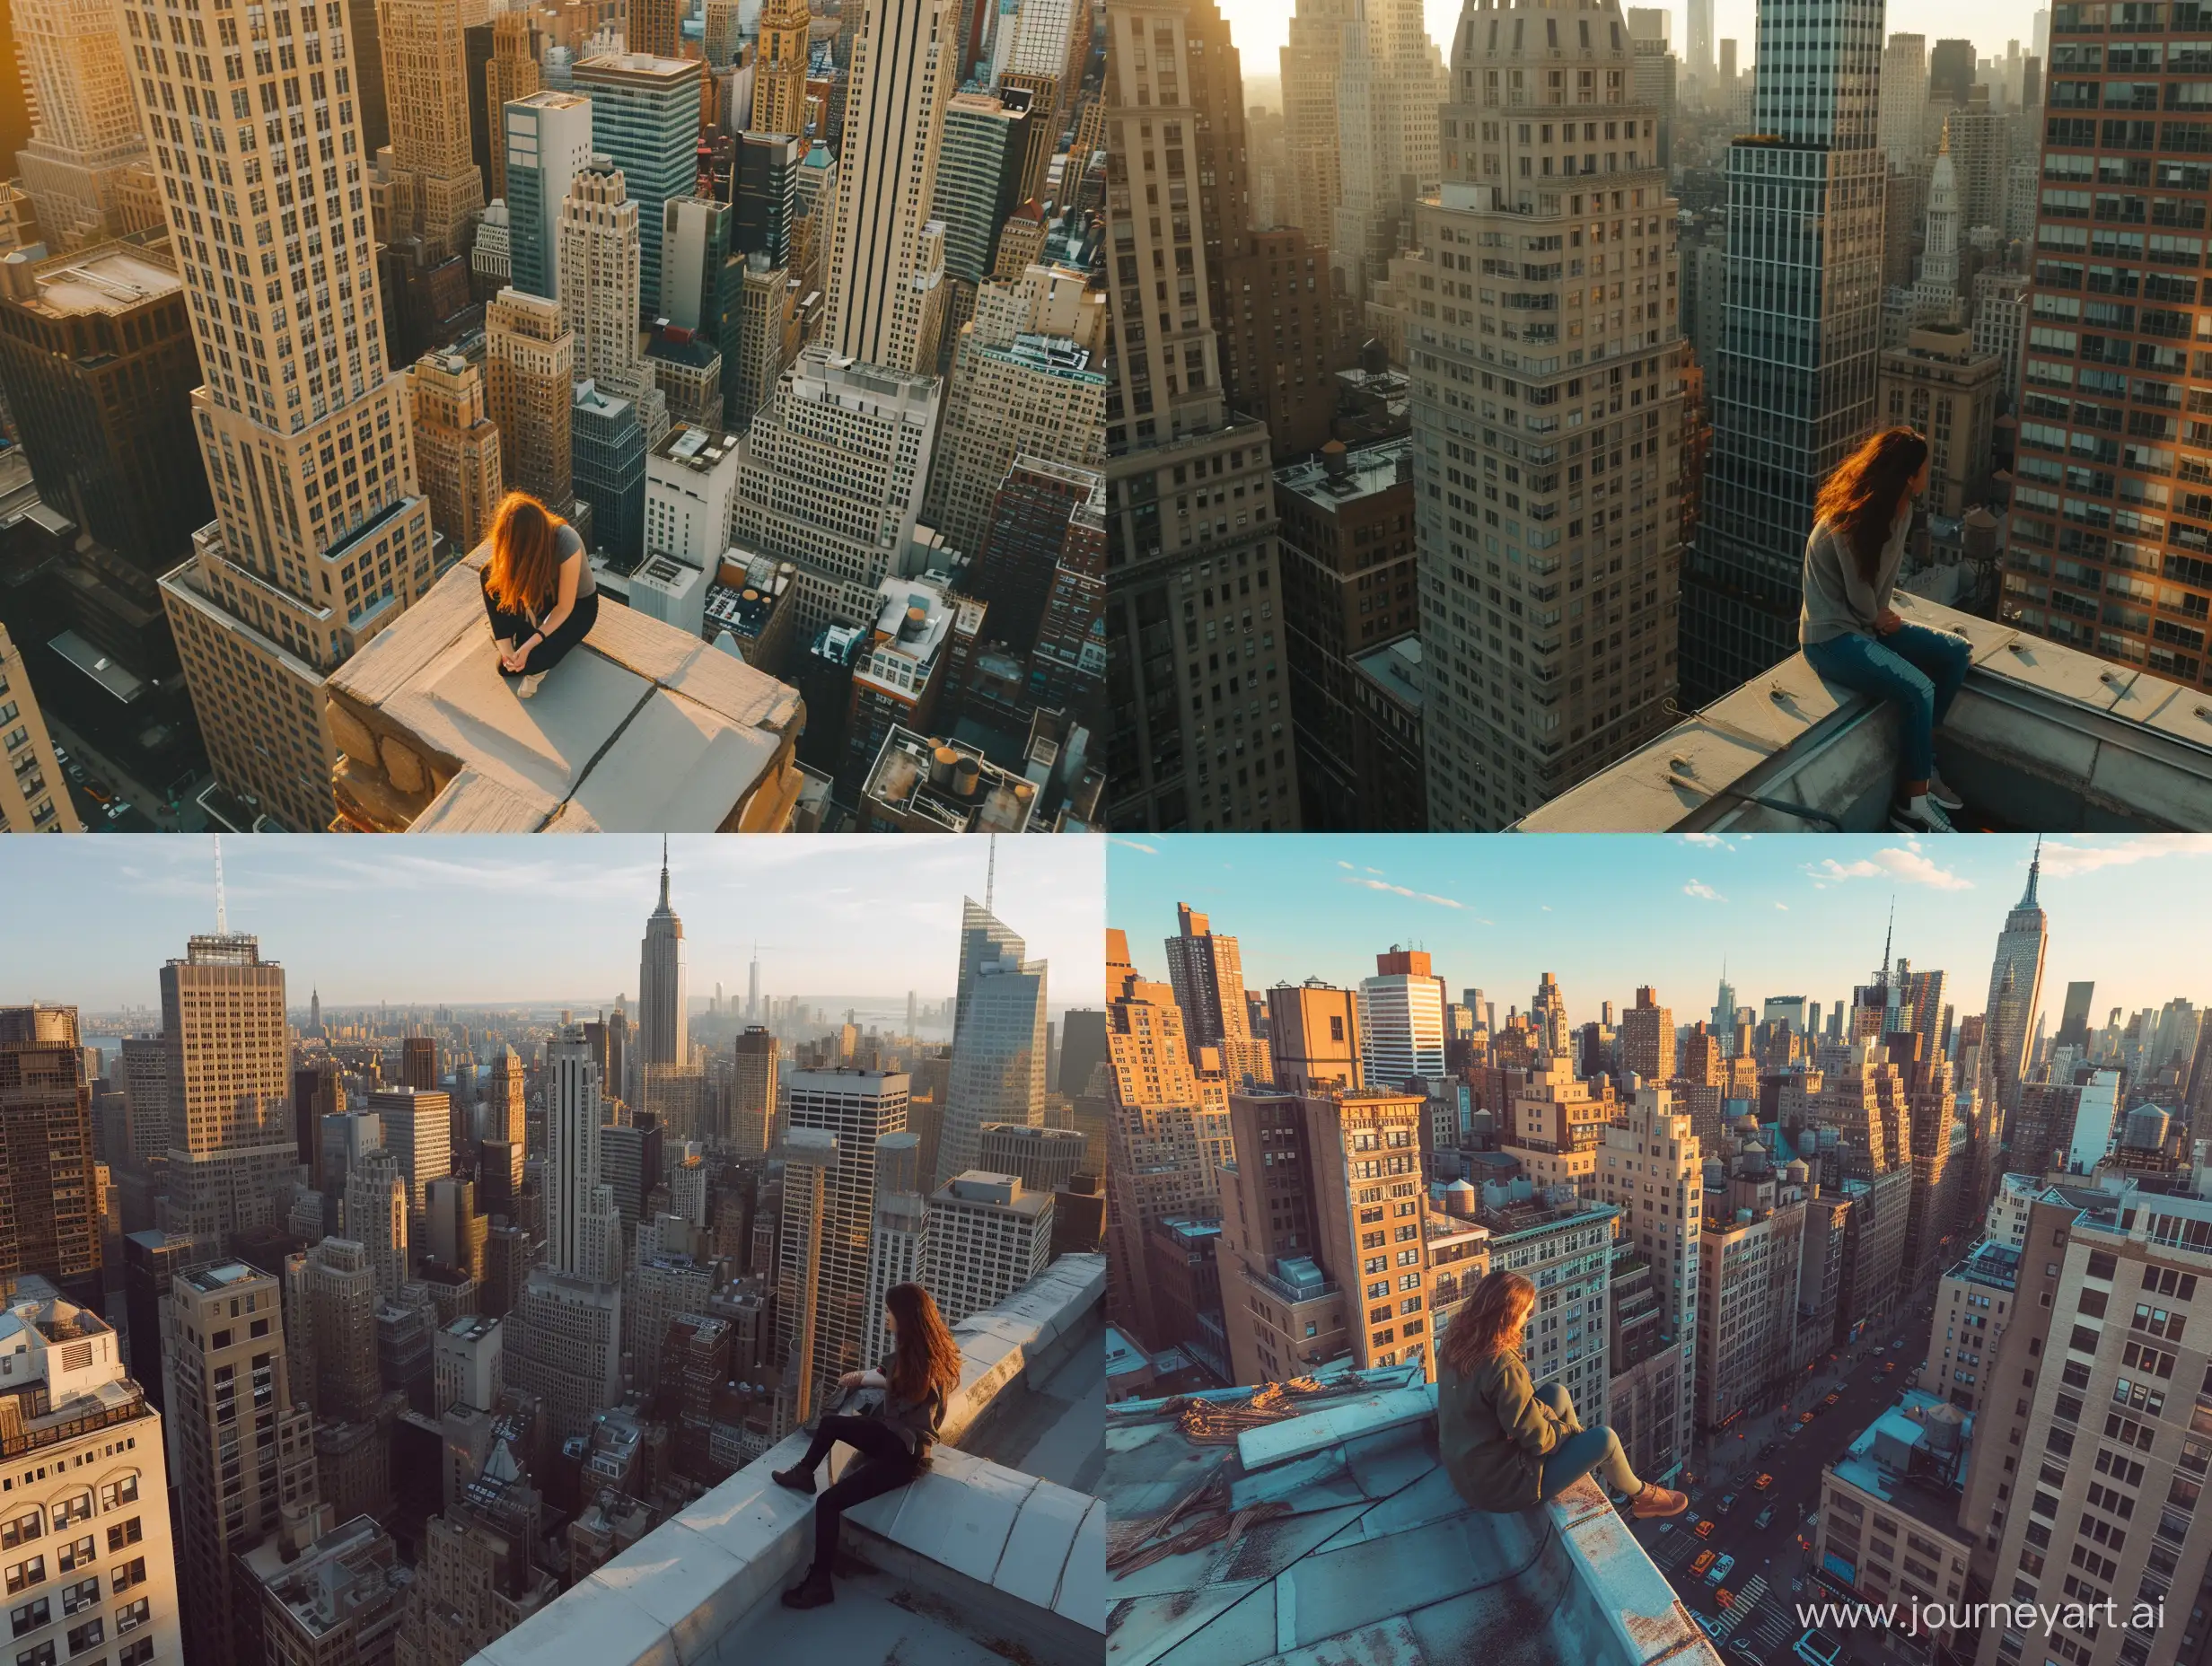 a bustling new new york city, the photo is bathed in natural lighting, day time setting. Shot in 4k with a high end DSLR camera. such as a Canon EOS R5 with a 50mm f/1. 2 lens, architecture, drone view, skyline, a woman is sitting on the edge of a rooftop
